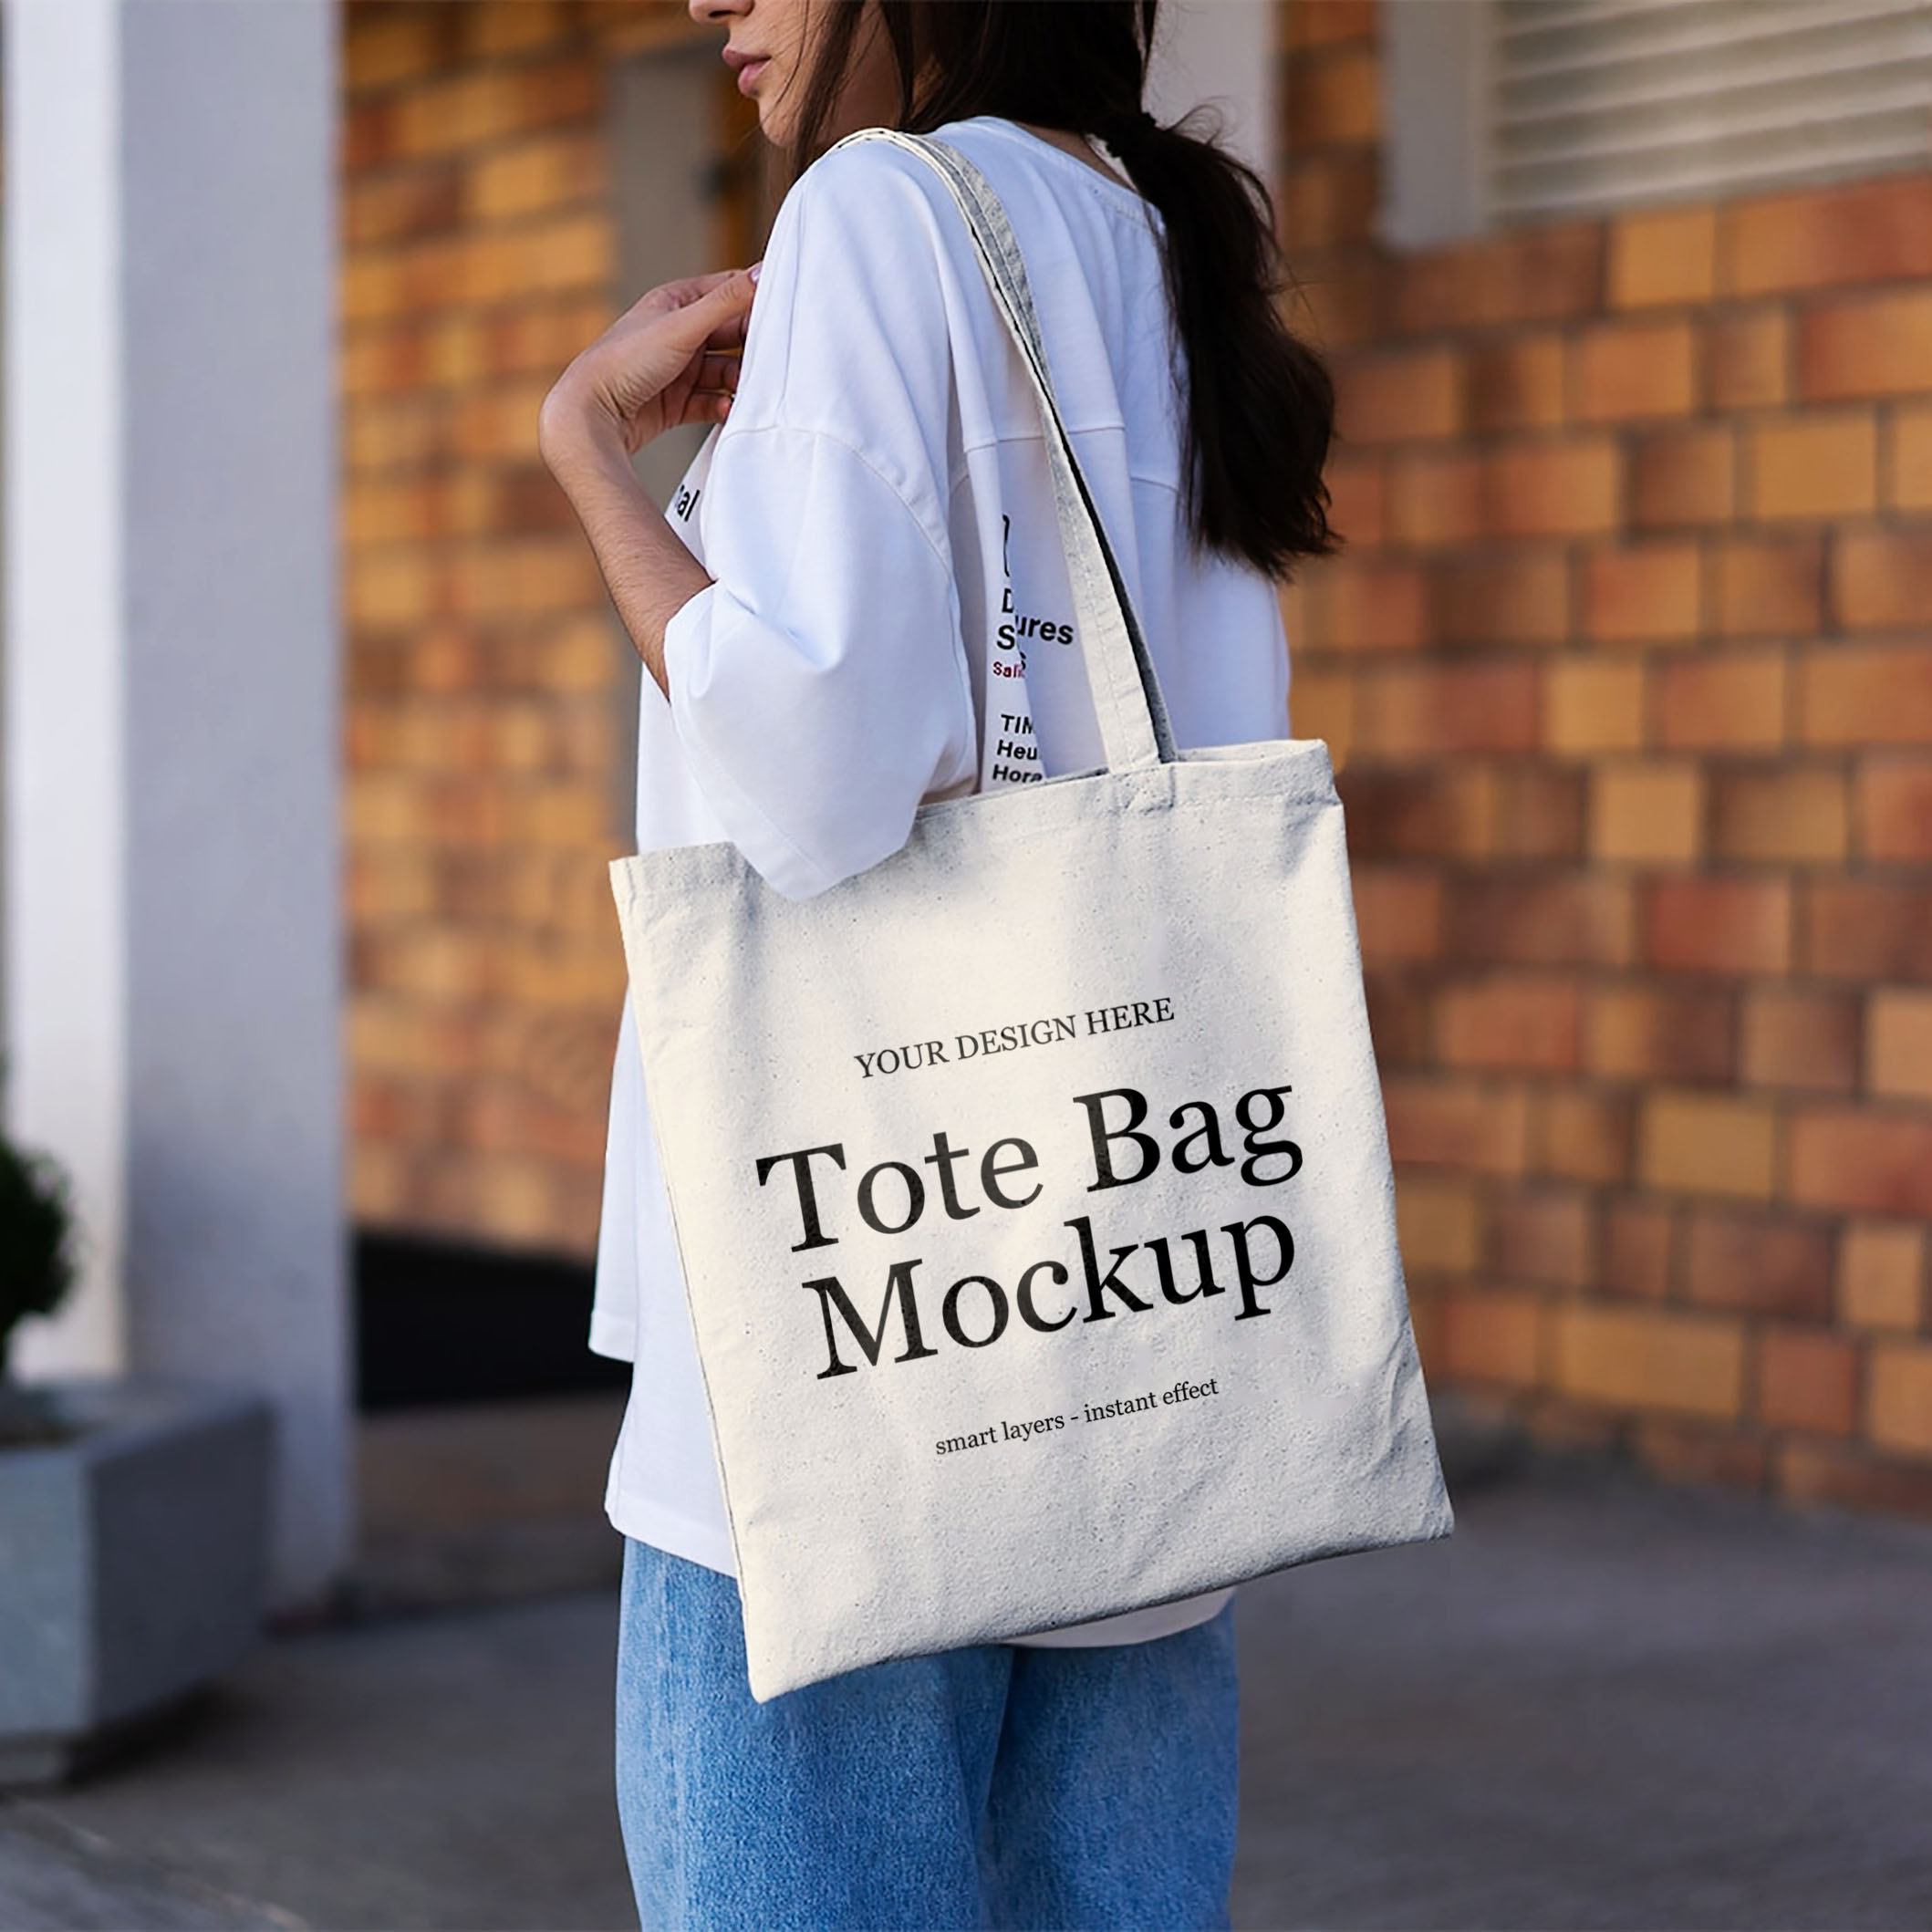 Free PSD White Canvas Tote Bag Mockup Download 42 by diosvolt on DeviantArt